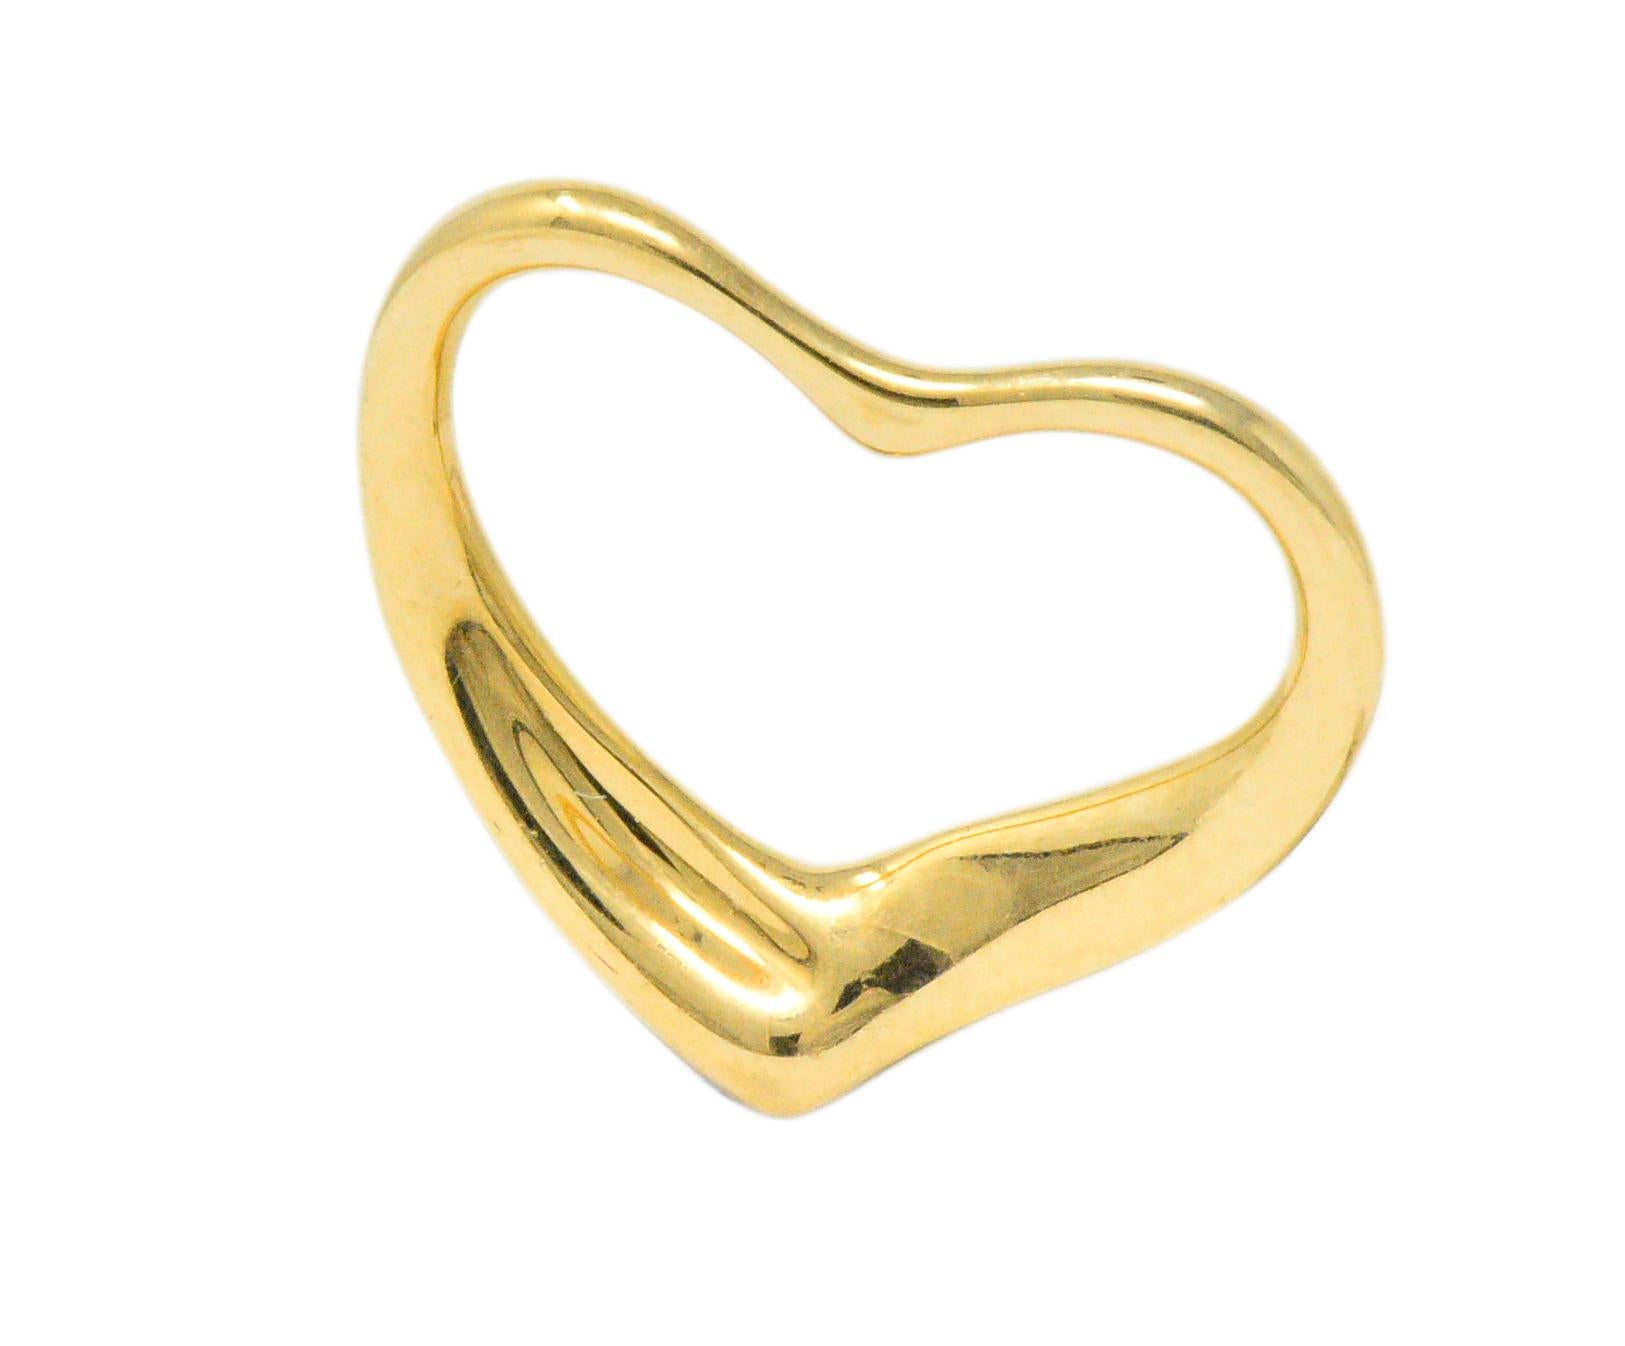 Designed as a high polished gold open heart

Sweet and simple design

Fully signed Tiffany & Co., Peretti

Measuring: 7/8 x 3/4 Inch

Total Weight: 3.2 Grams

Charming. Romantic. Stylish.  
 

 

Stock Number:We- 1798